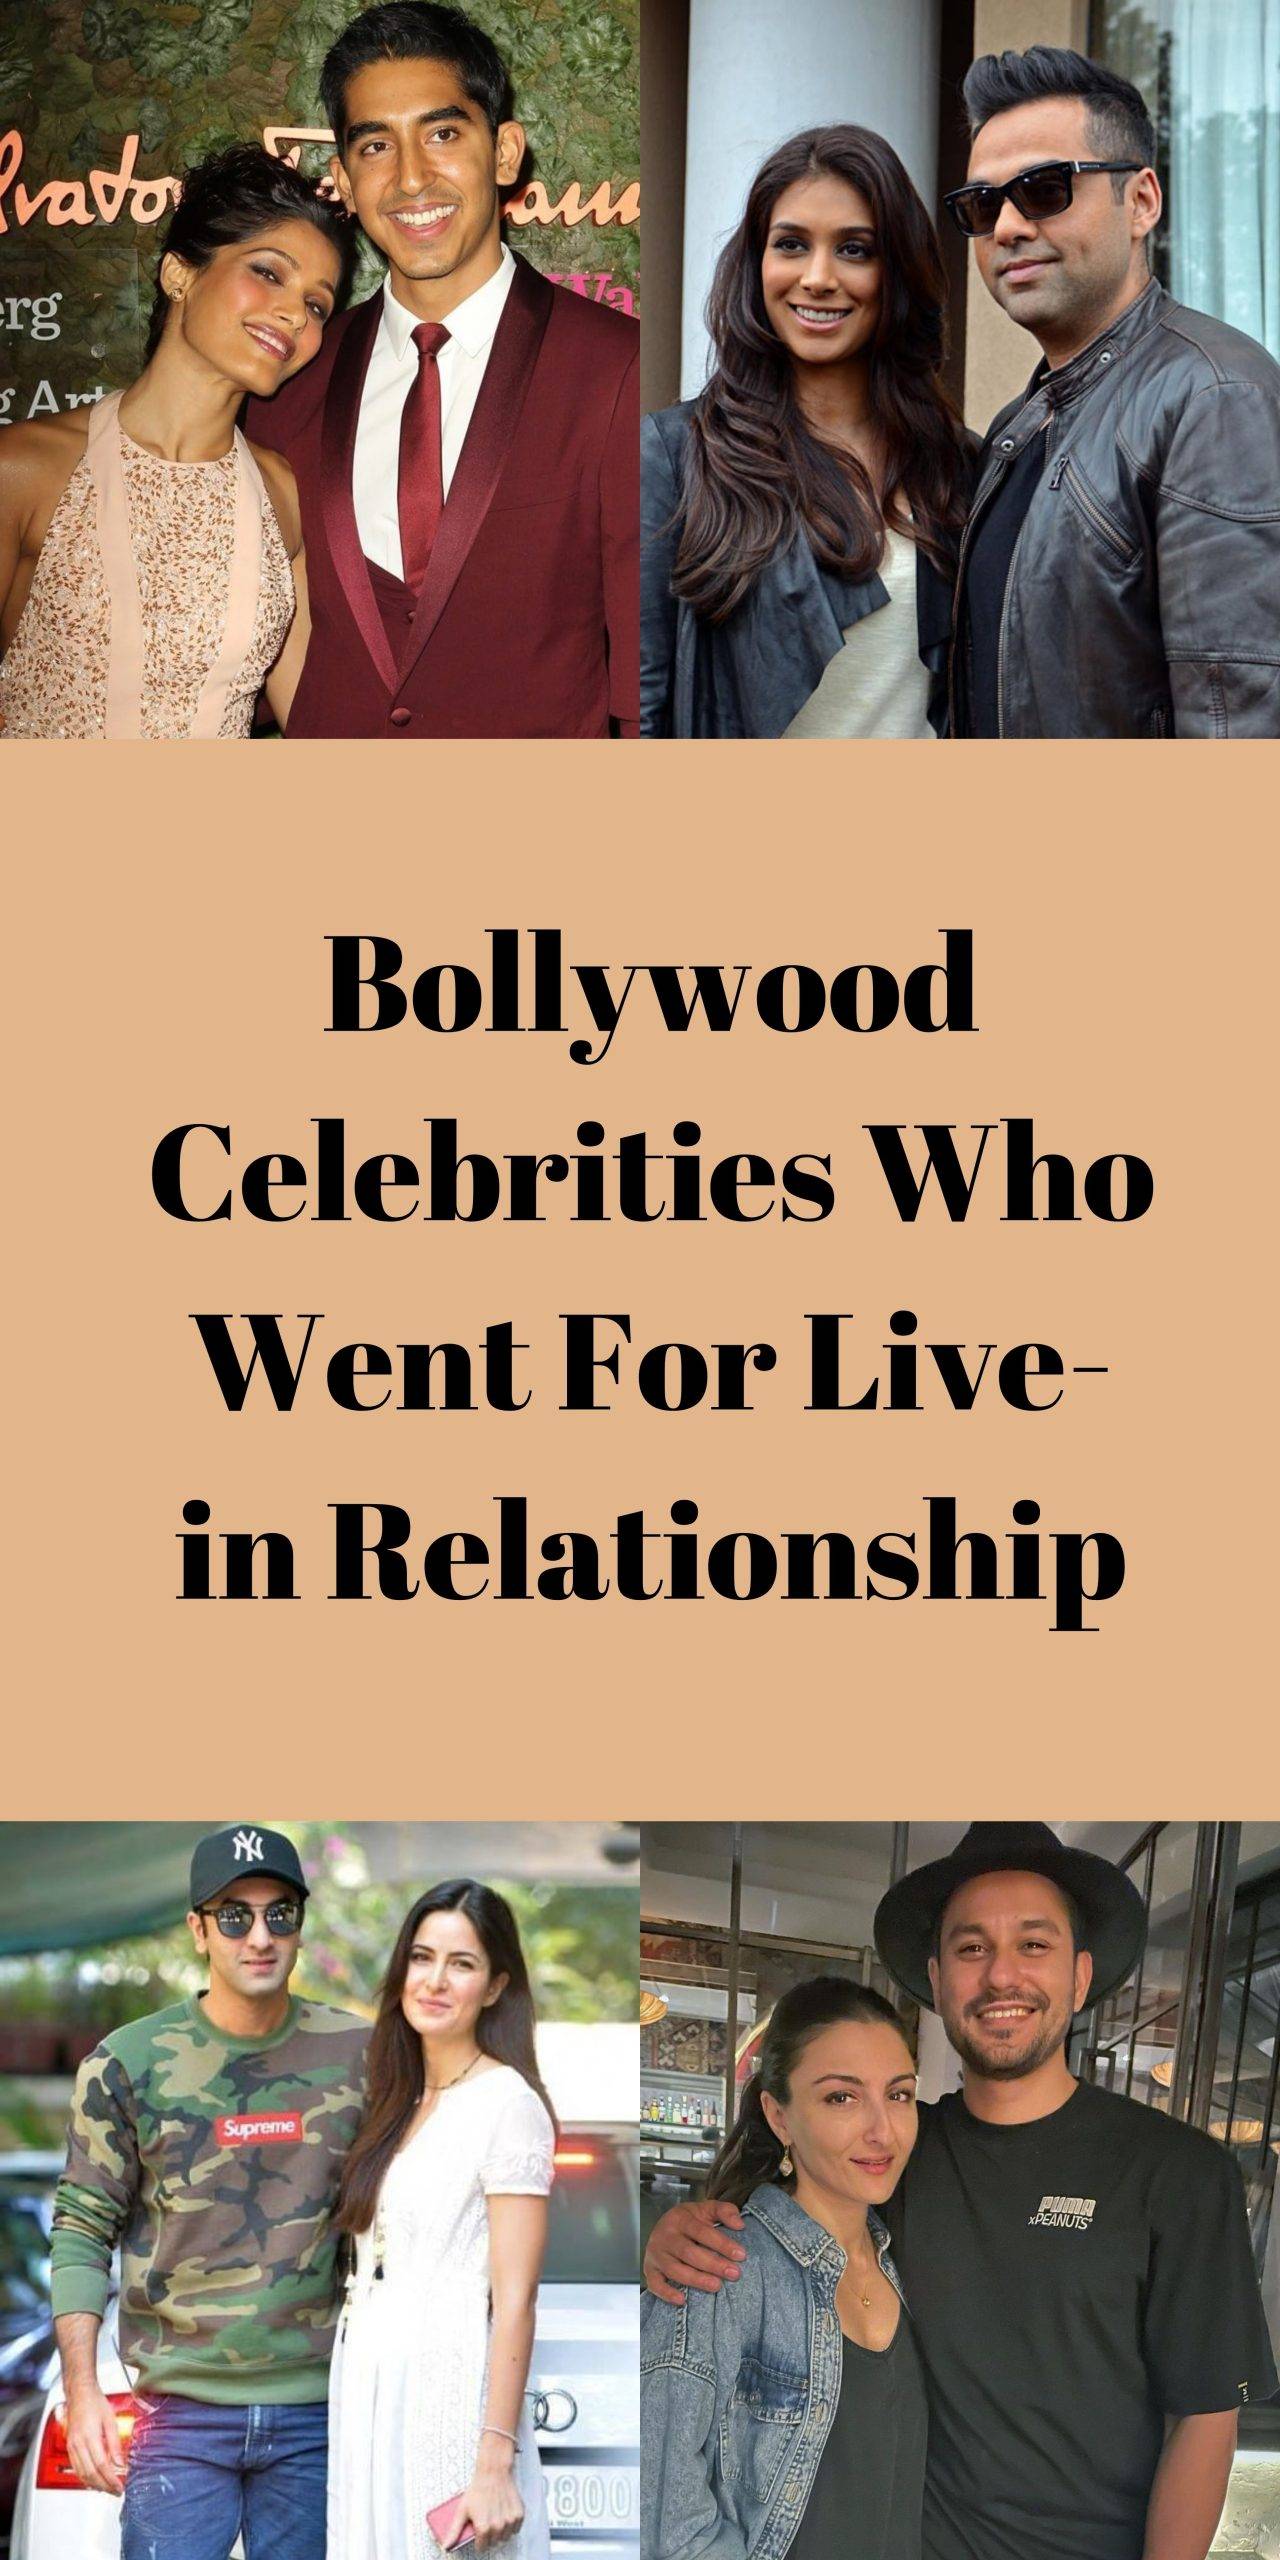 Bollywood Celebrities Who Went For Live-in Relationship